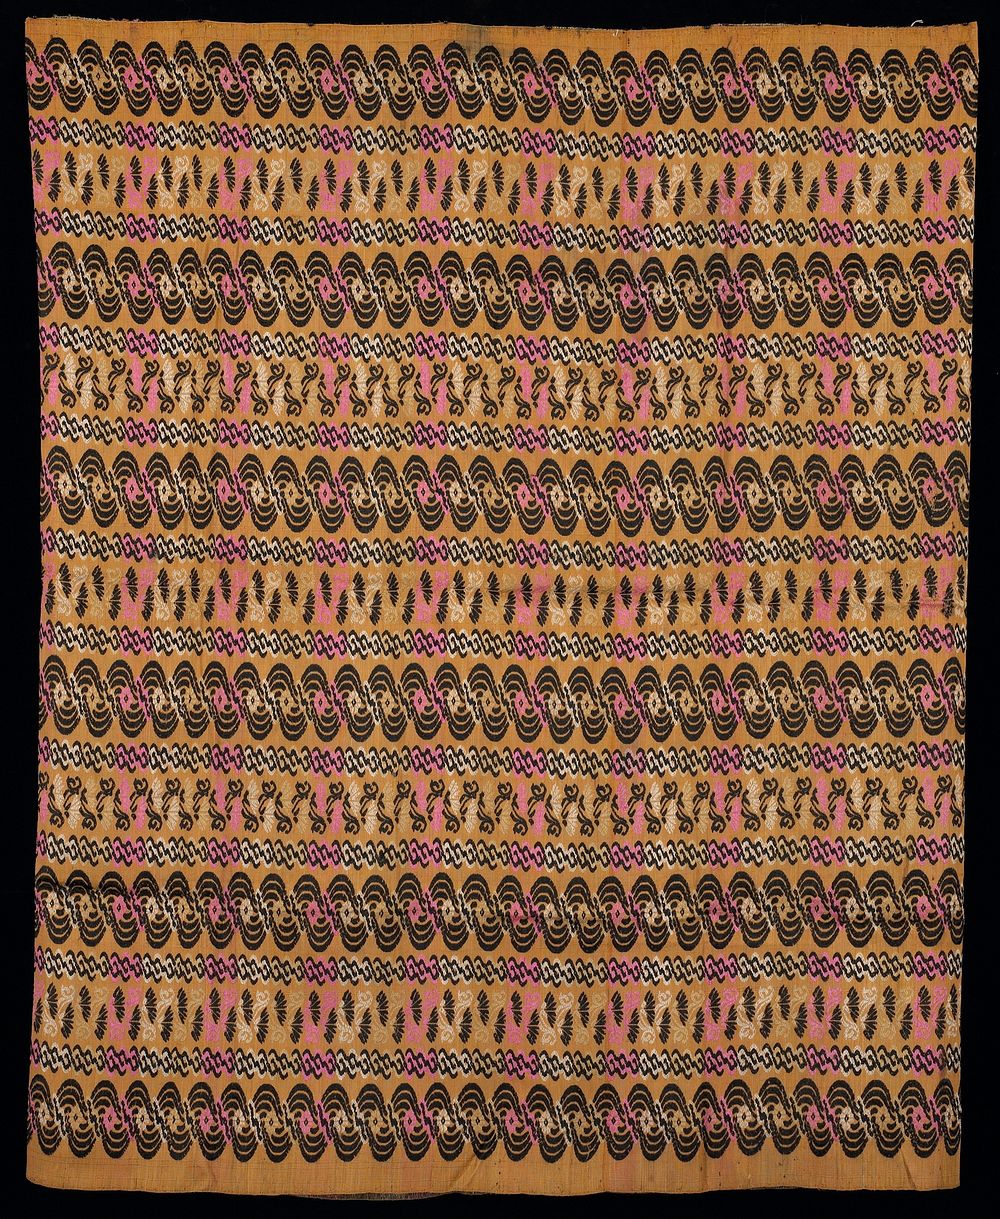 horizontal woven pattern in black, pink, white on gold background; Luntaya style. Original from the Minneapolis Institute of…